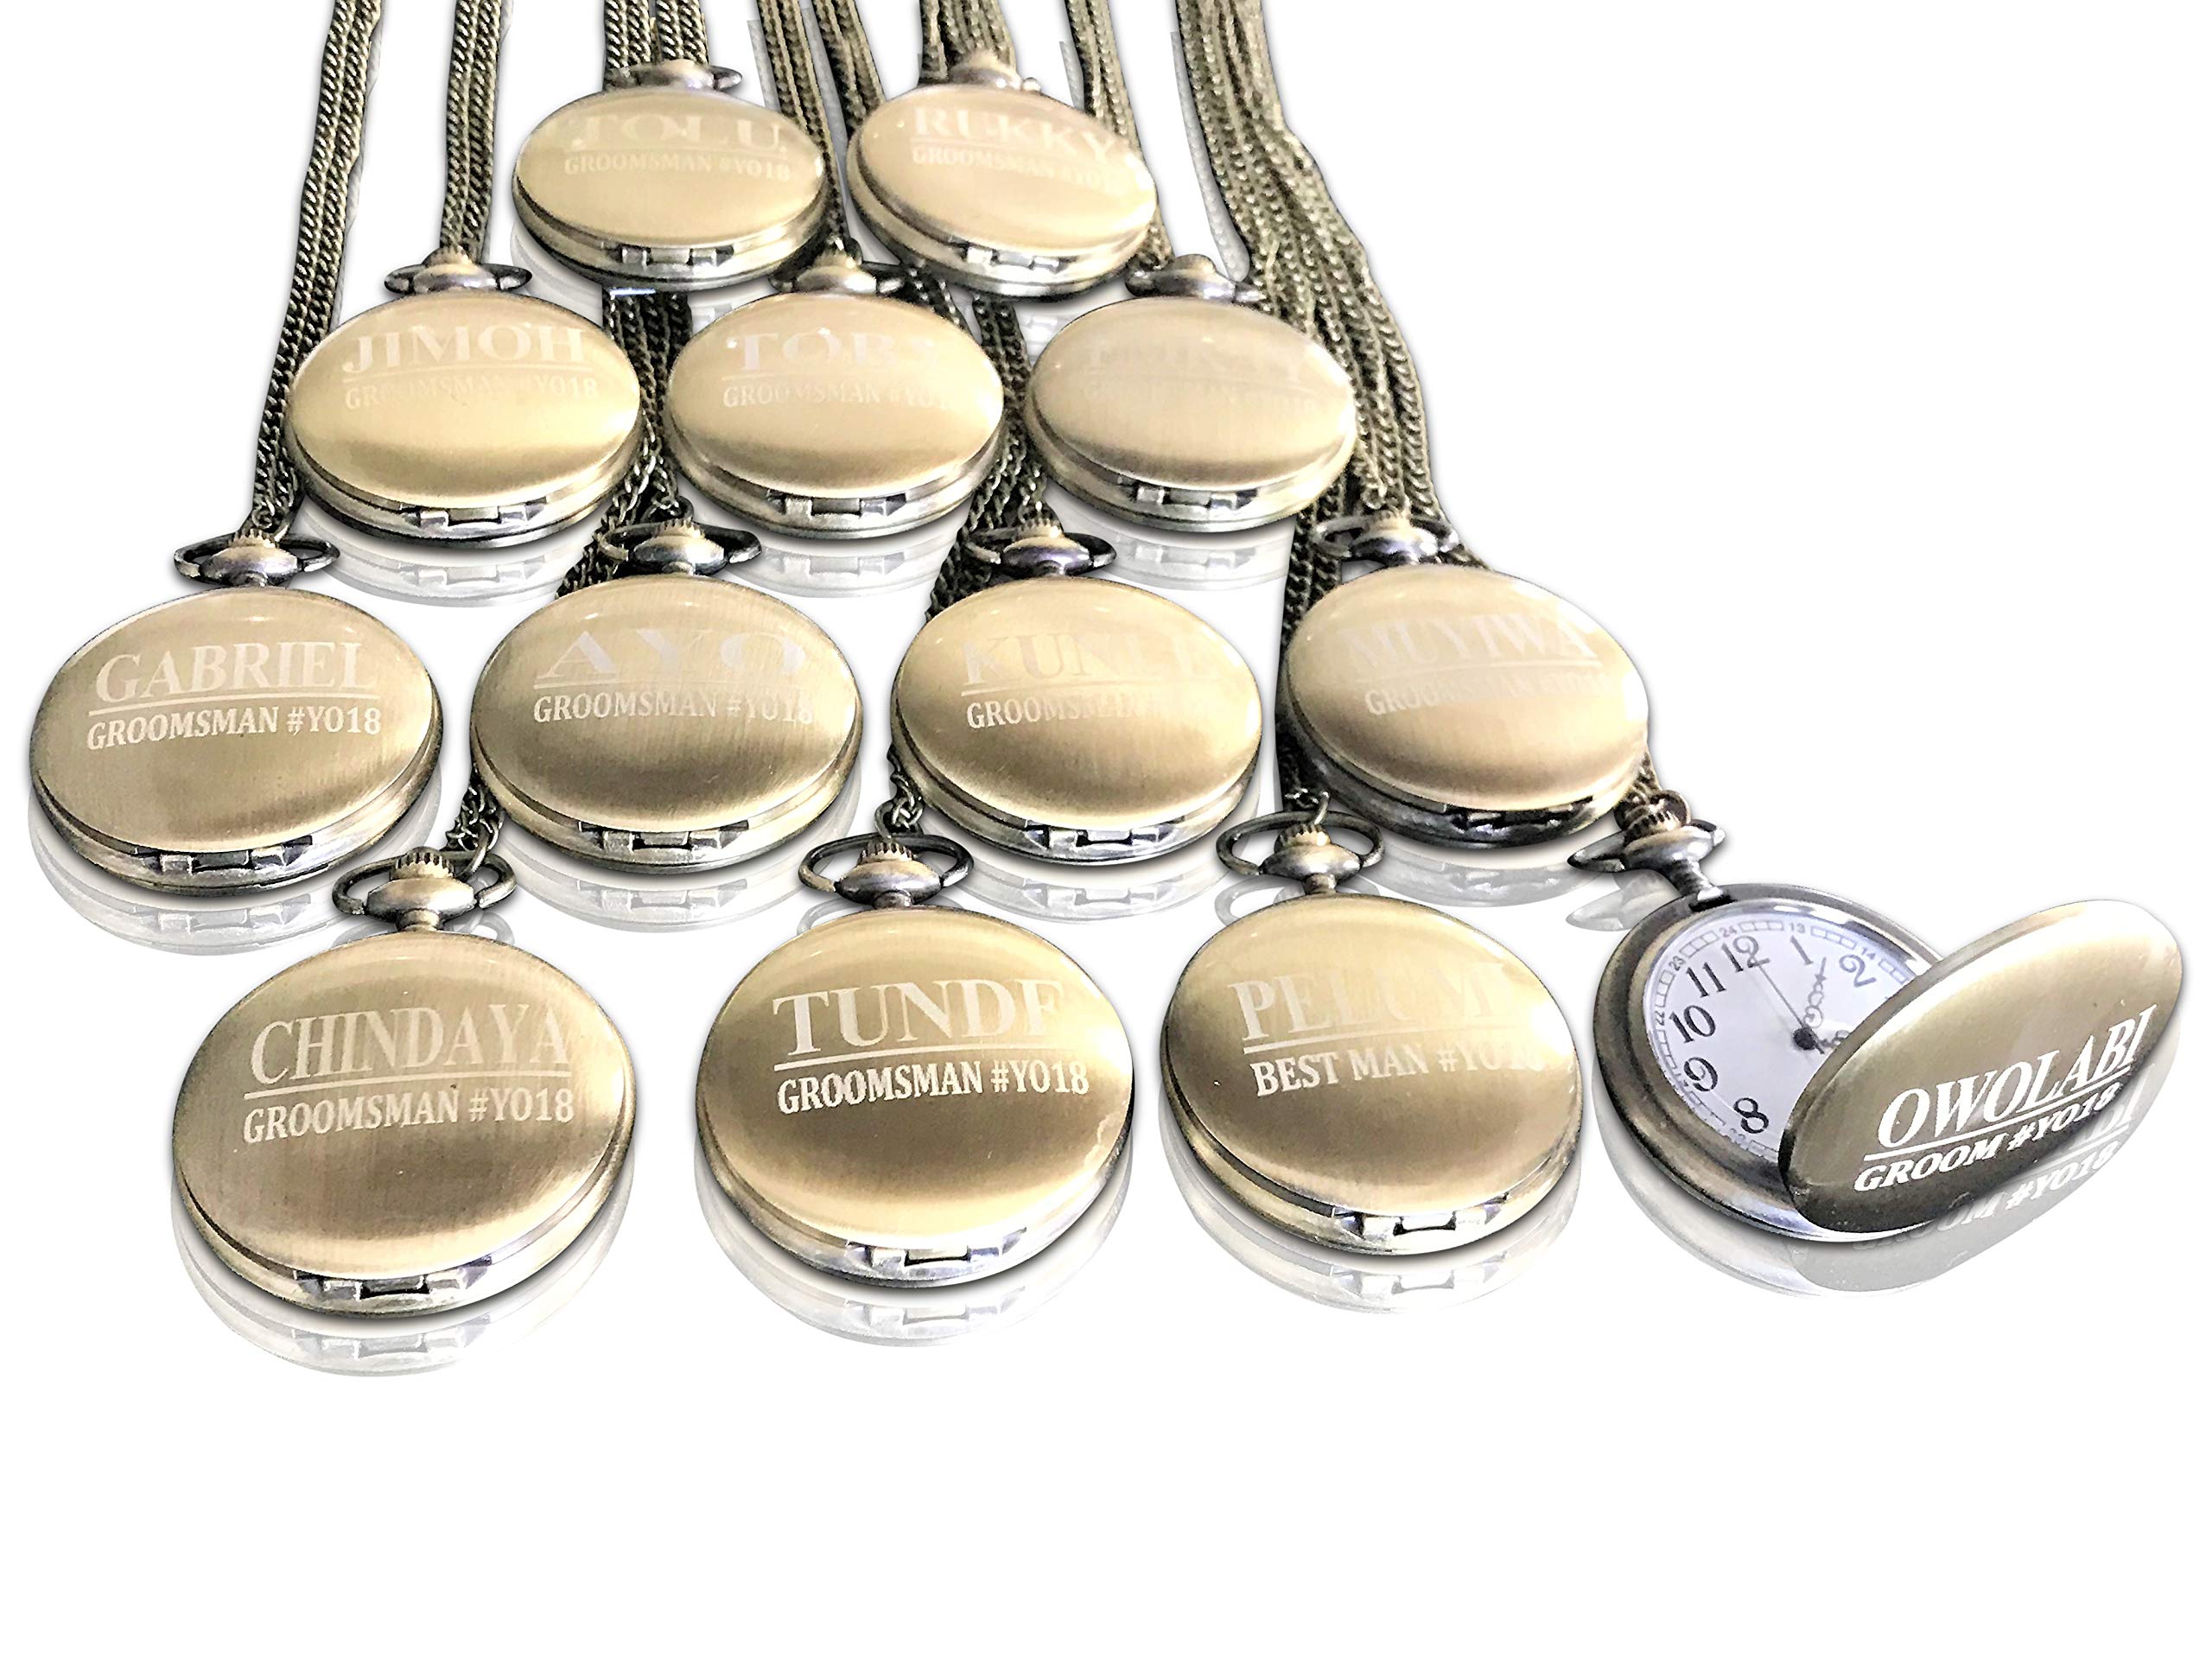 Eternity Engraving i 8 groomsmen Engraved Pocket Watches, Set of 8 groomsmen Wedding Unique gifts, chain, Box and Engraving Included, comes in 5 colo